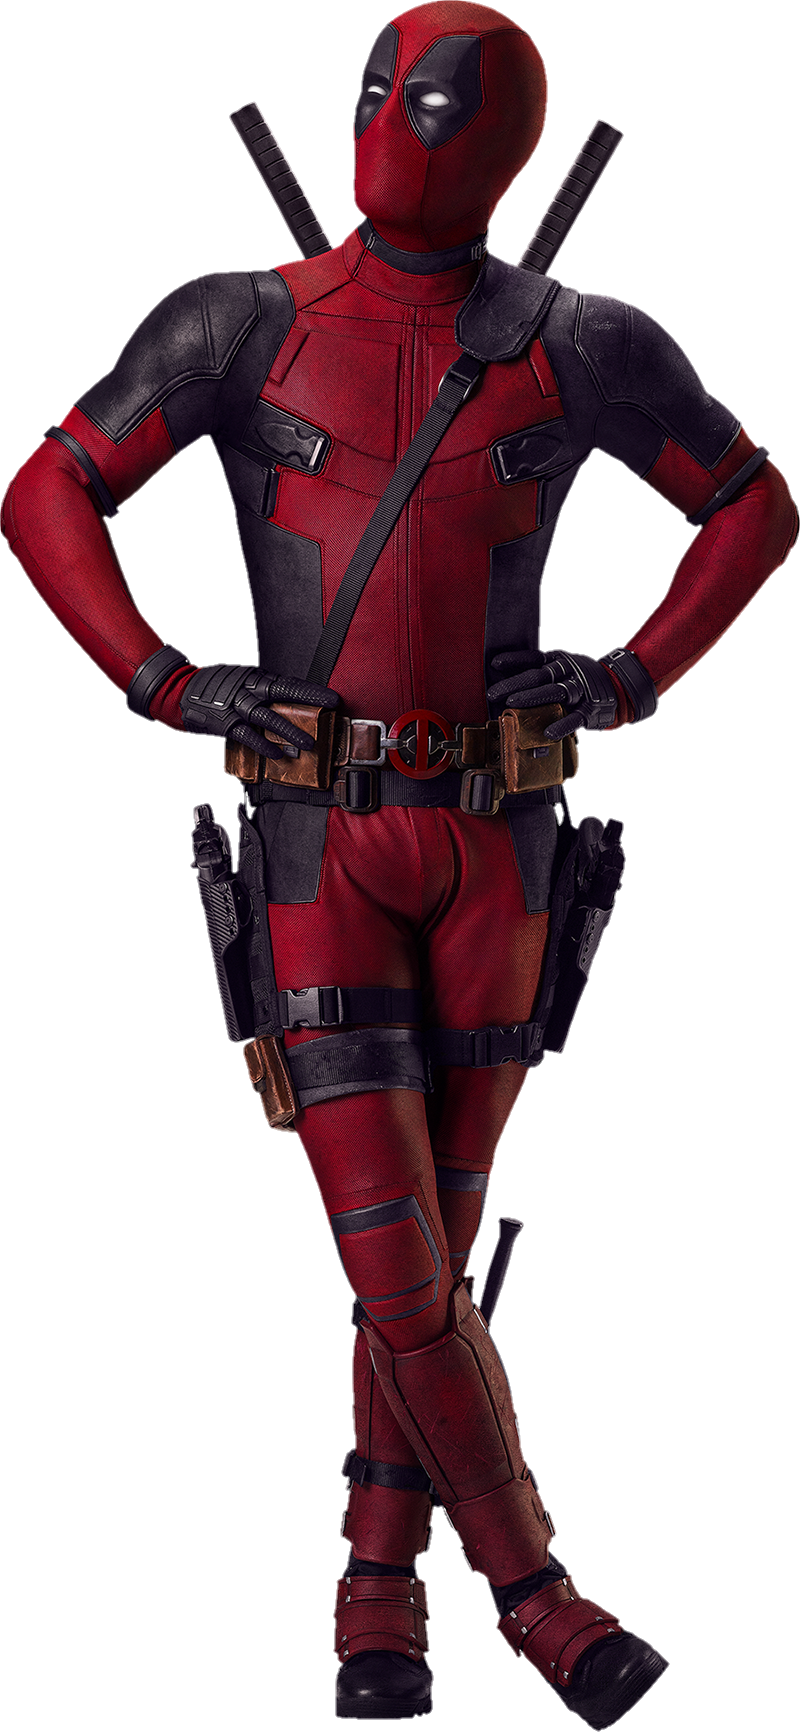 deadpool-png-image-from-pngfre-32